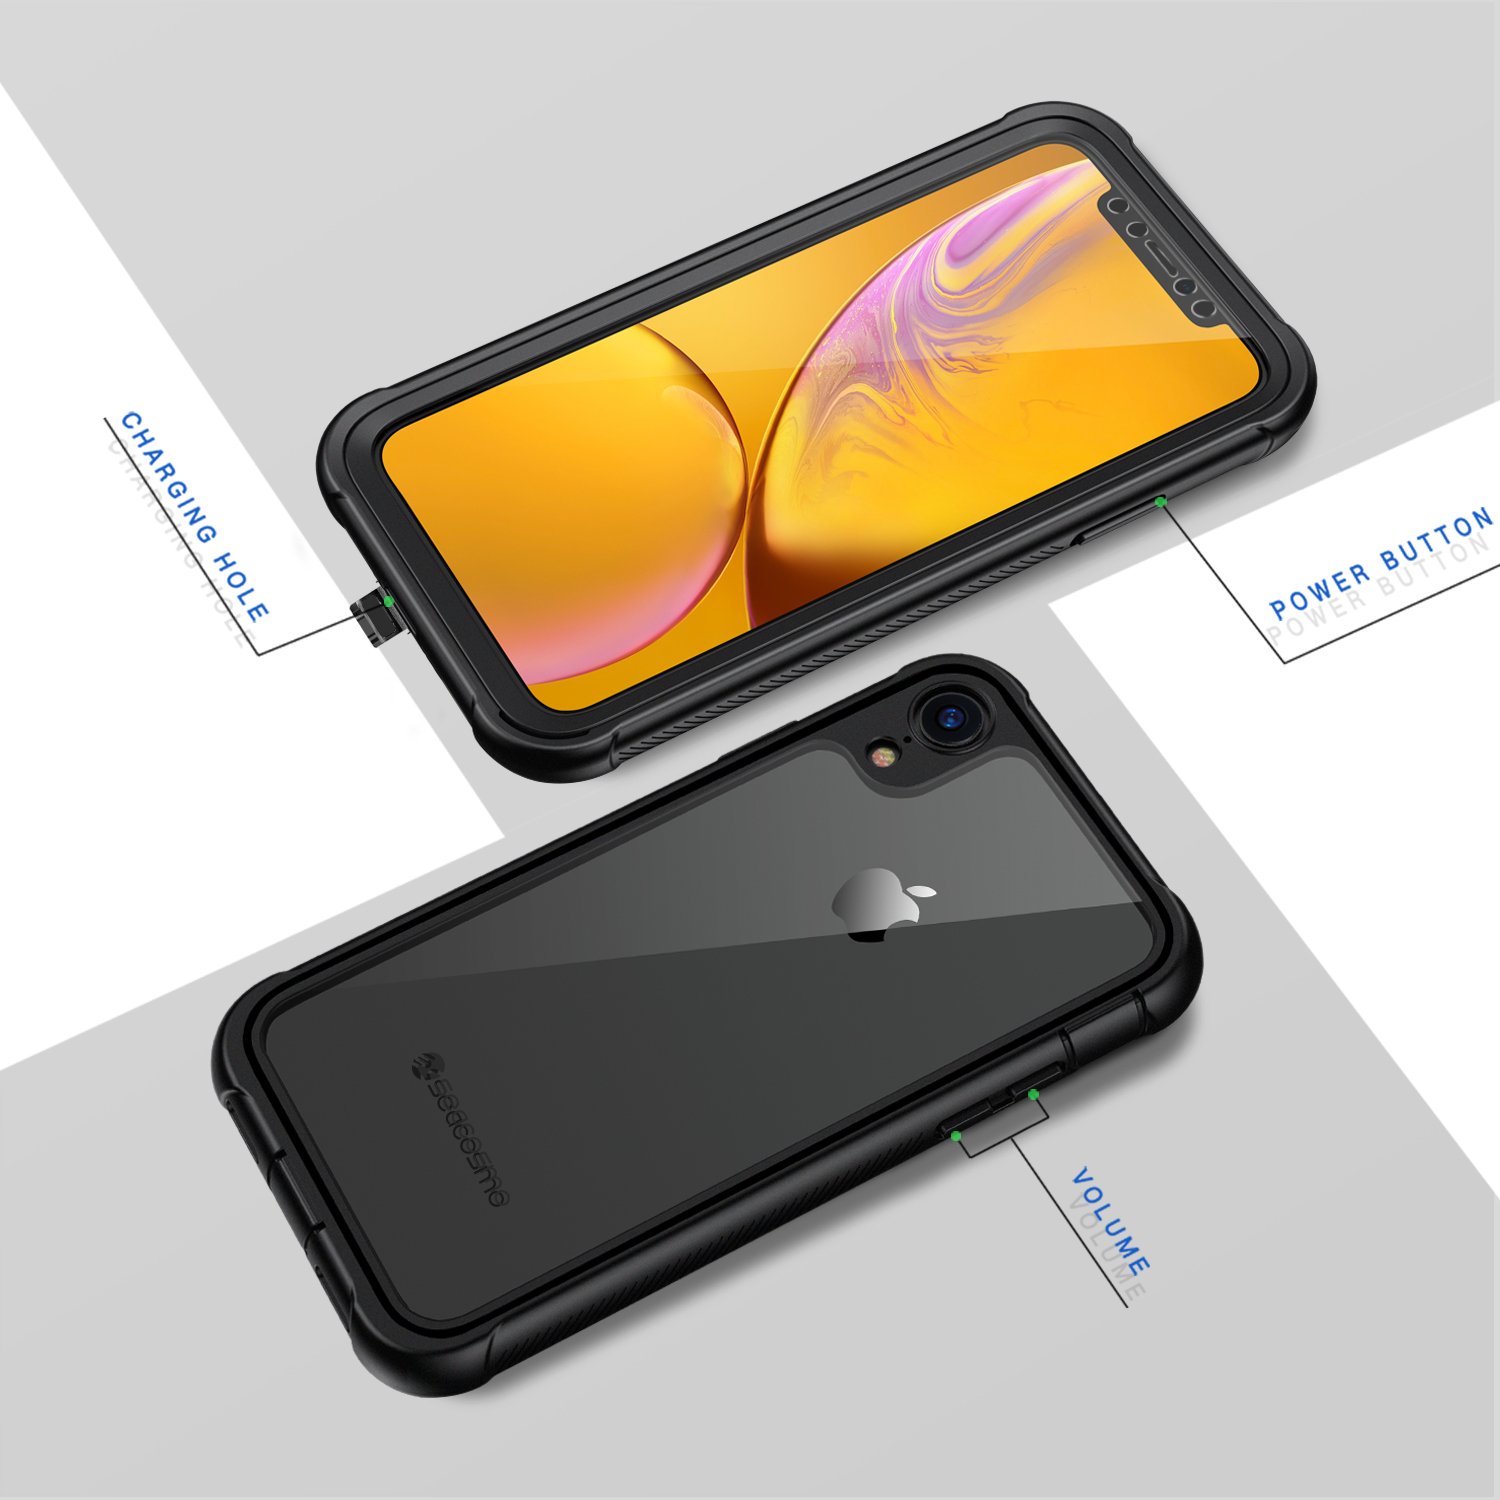 Seacosmo iPhone XR Case, Shockproof Case [with Screen ...